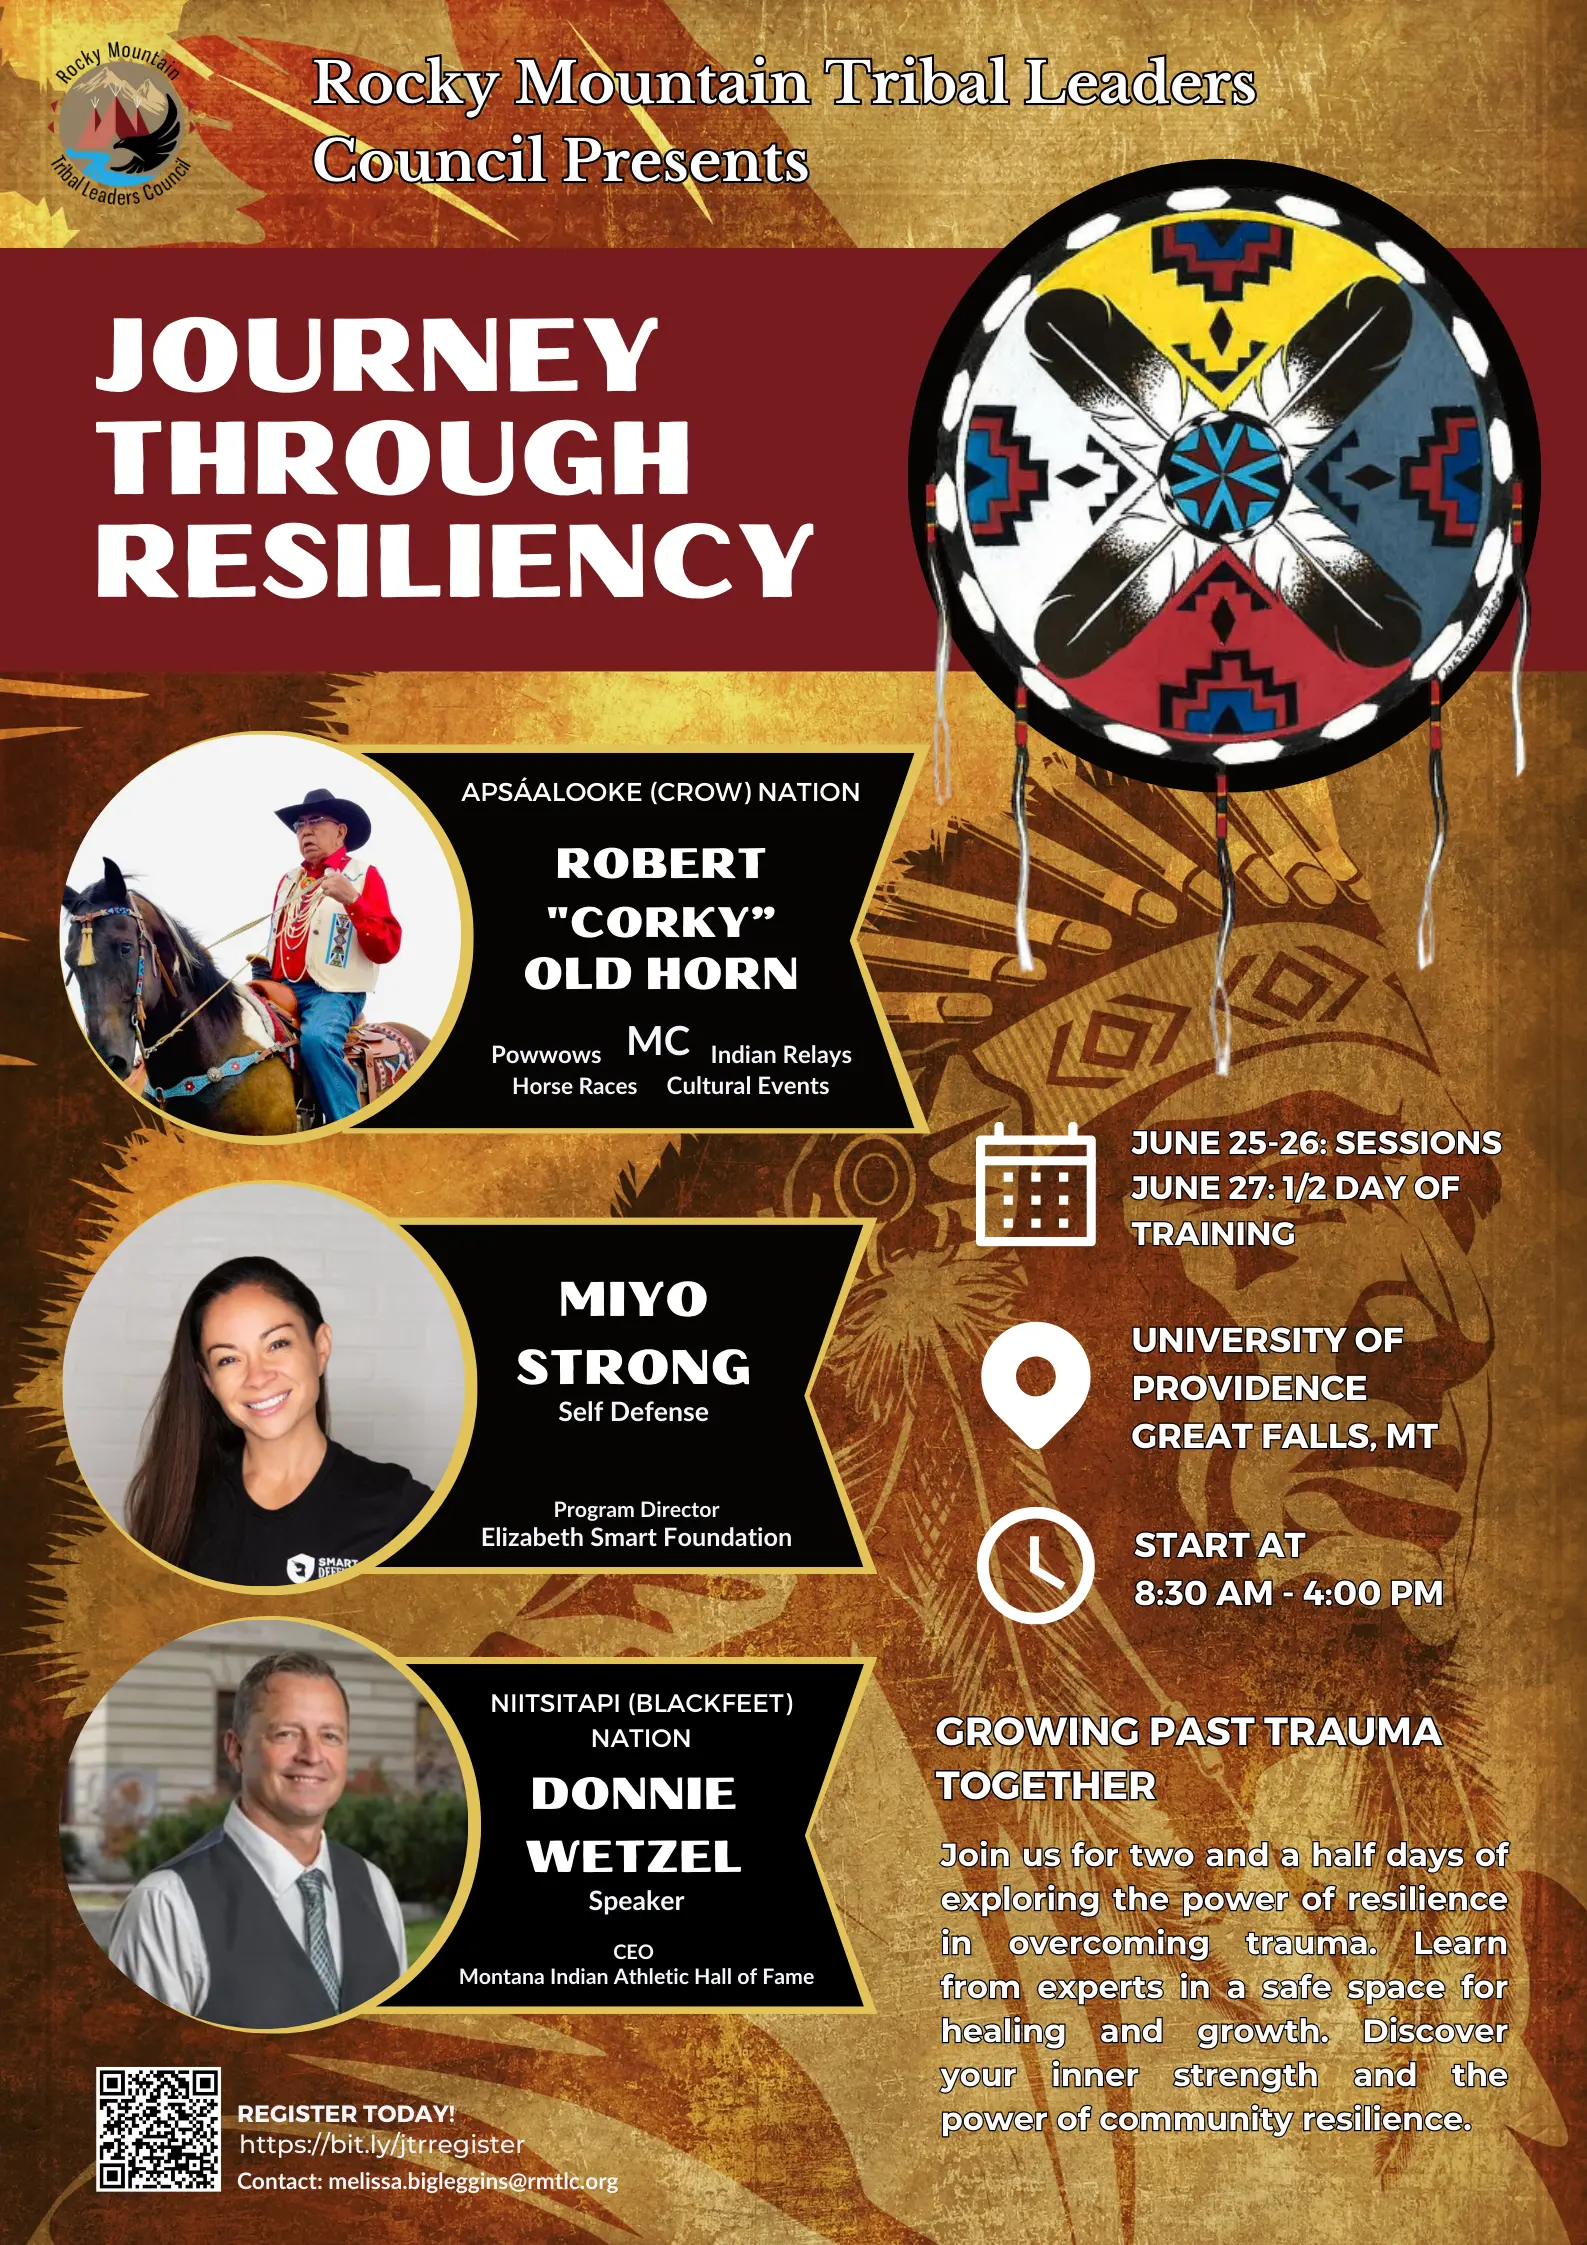 Journey Through Resiliency